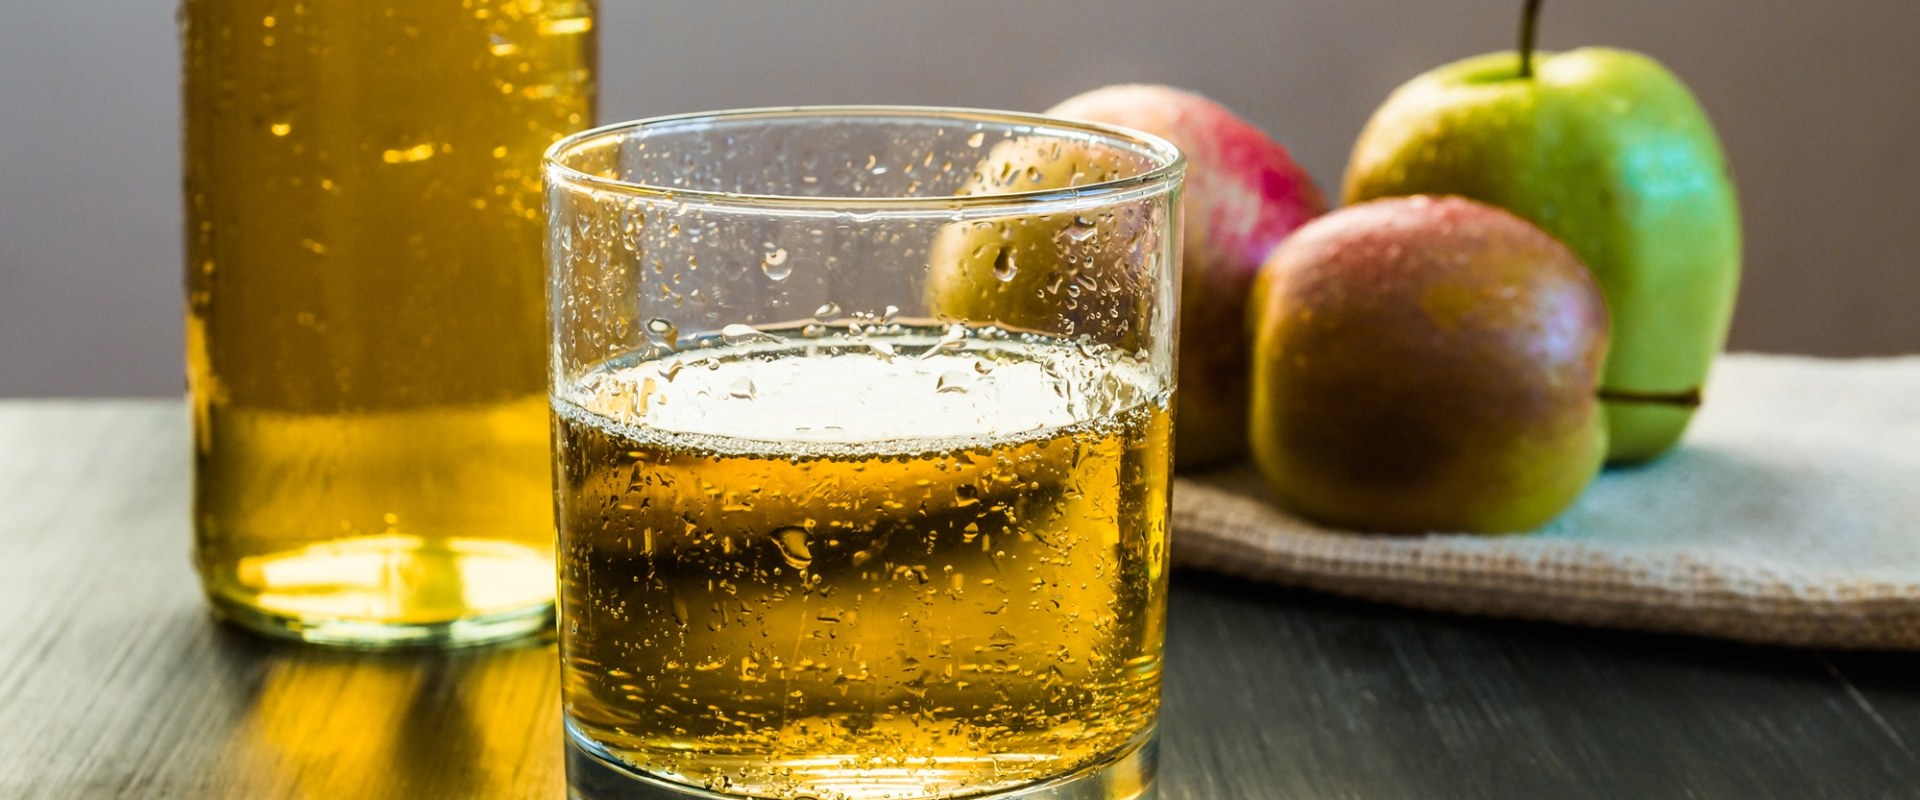 Is hard cider considered beer or liquor?